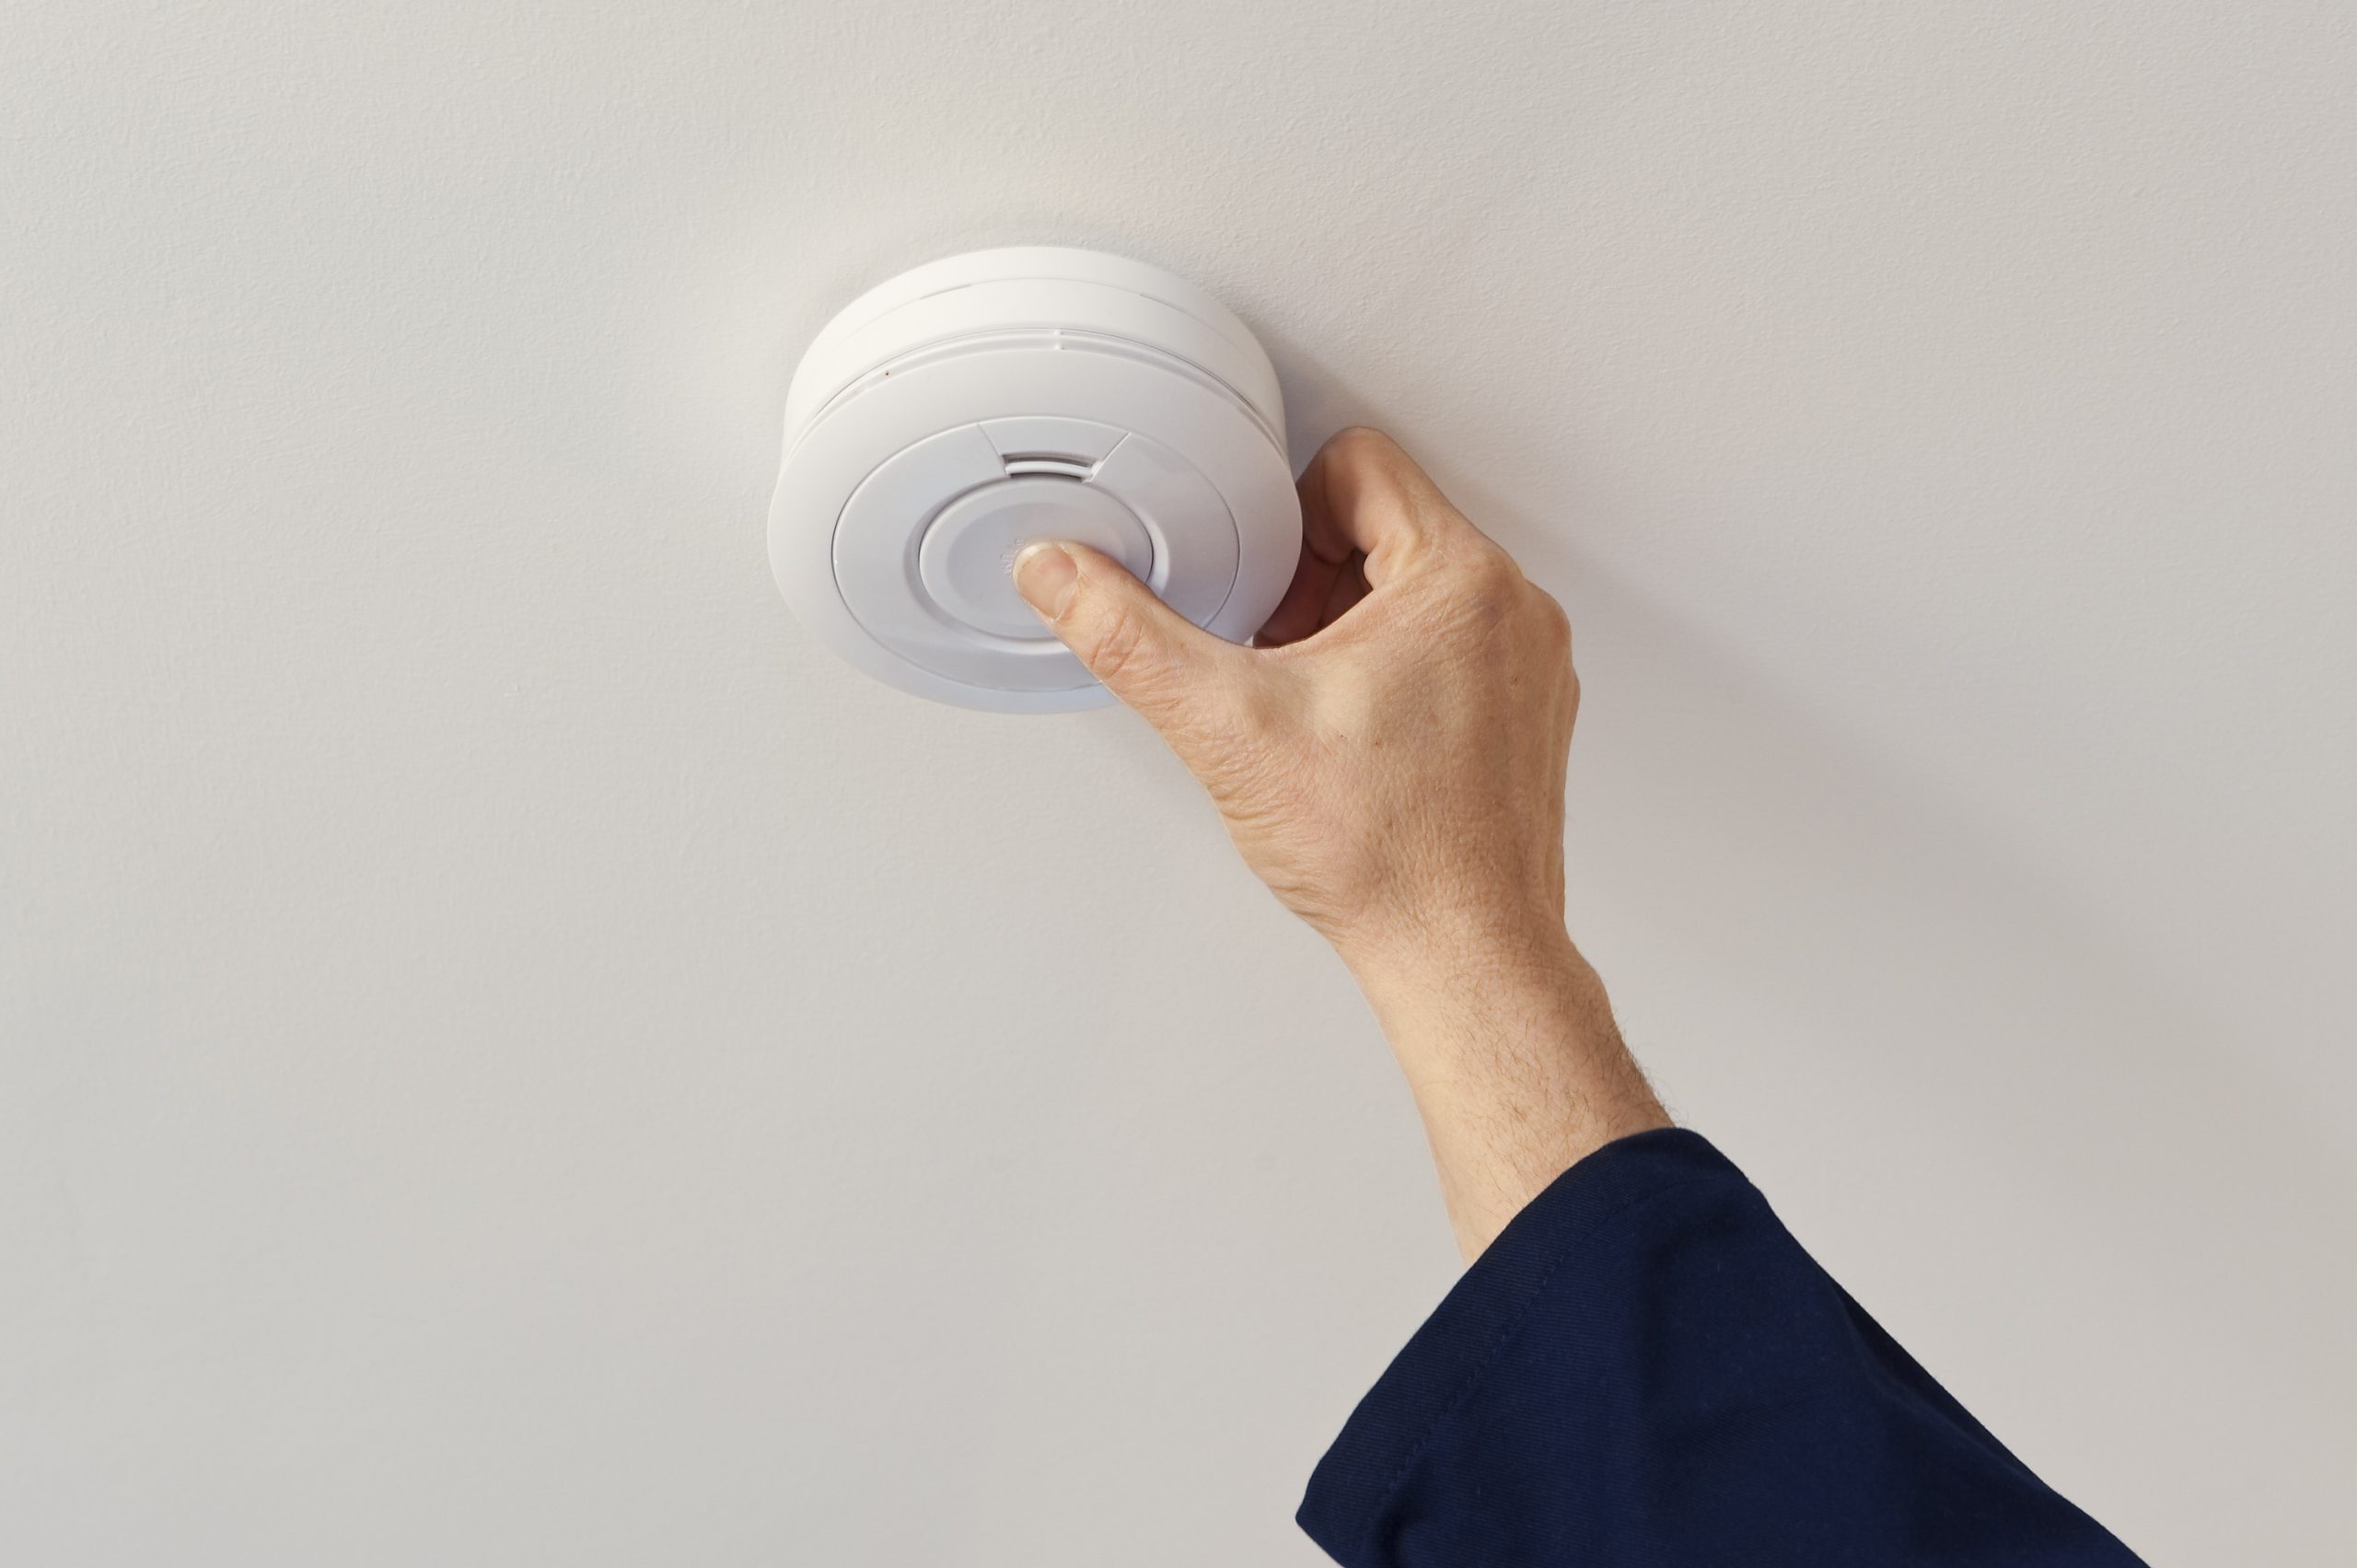 What Does The Button On A Smoke Detector Do?